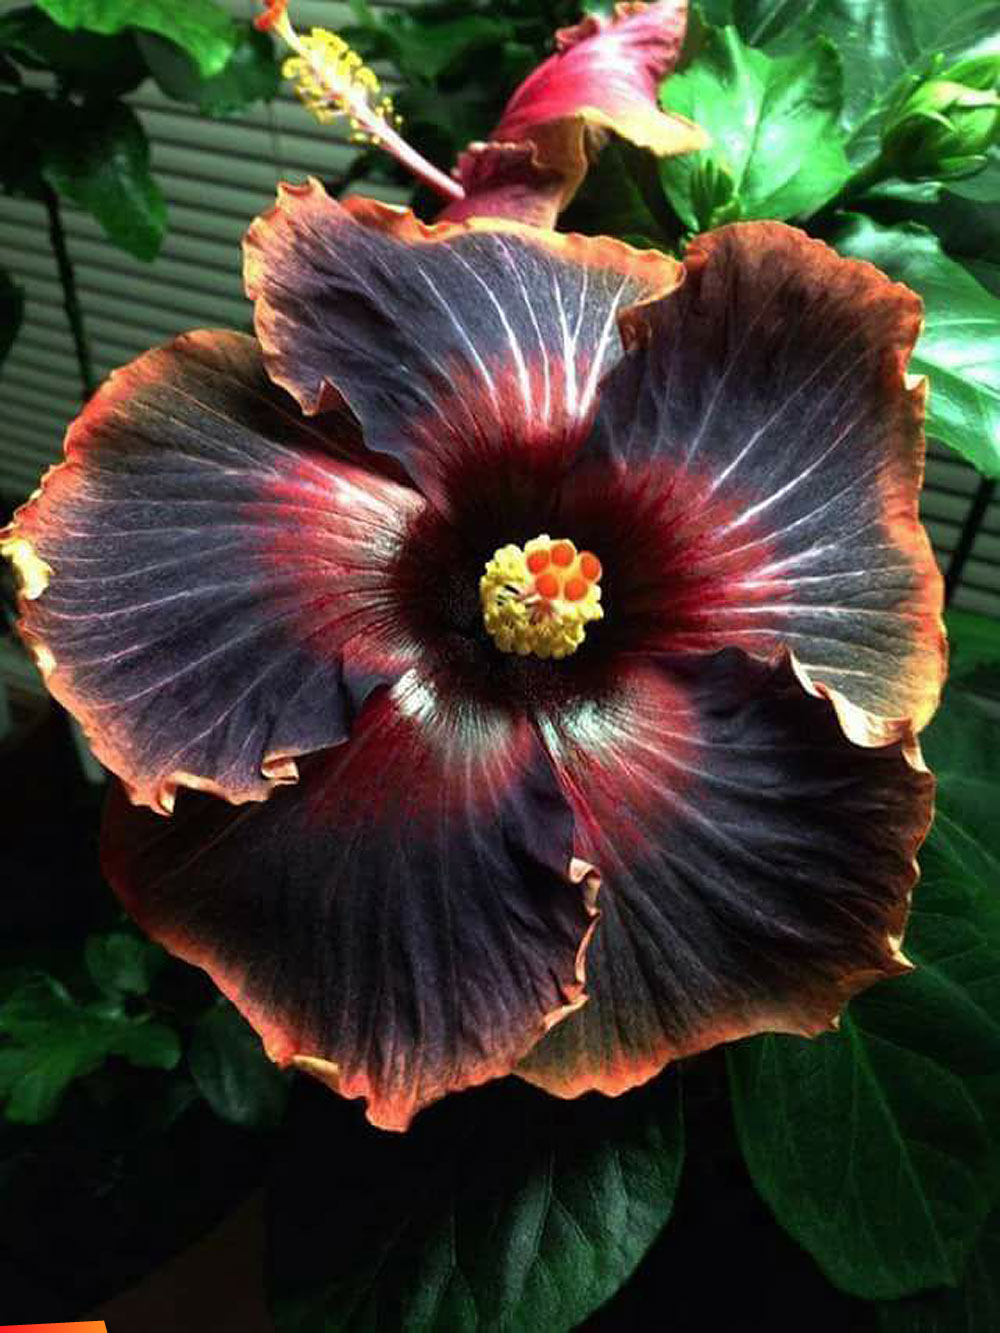 Gorgeous hibiscus, brown, red and orange